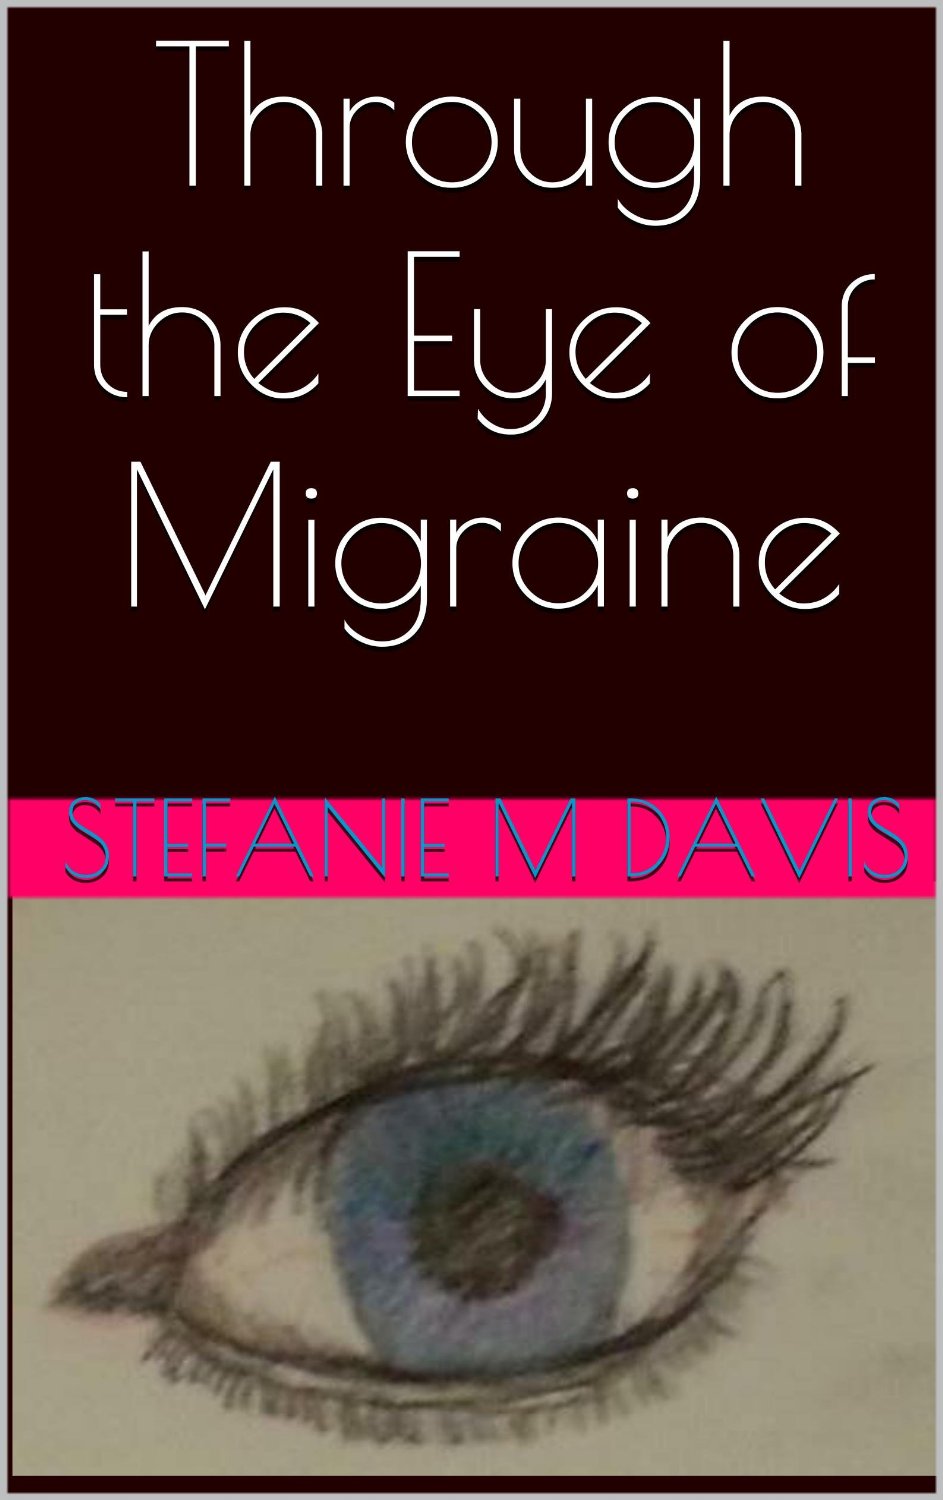 Migraine books betsy baxter